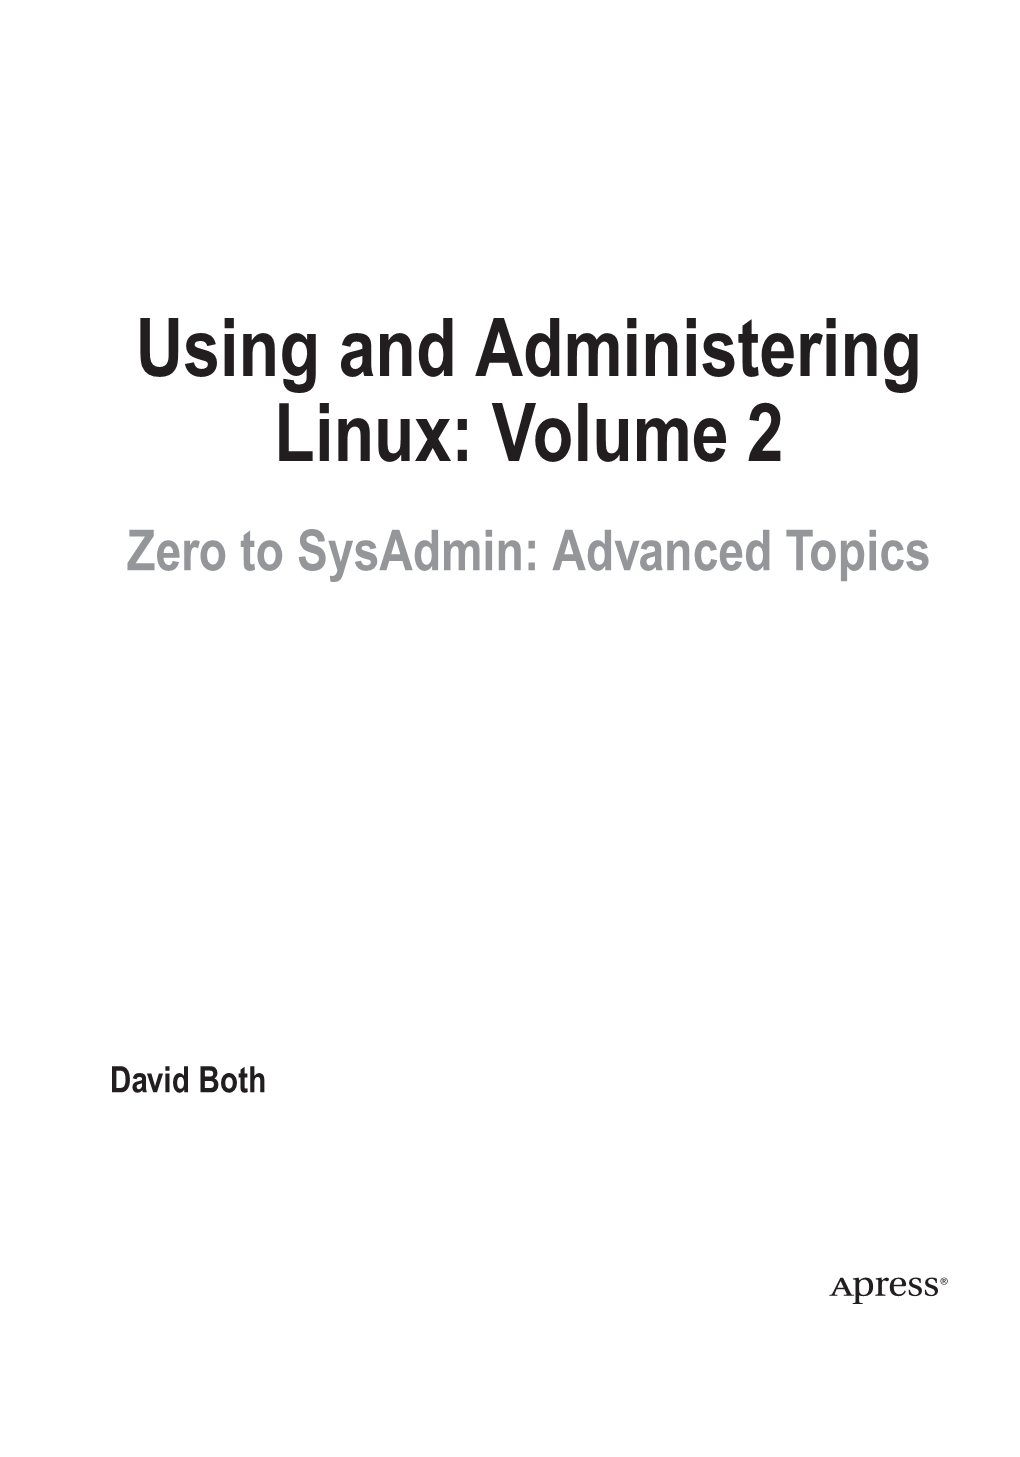 Using and Administering Linux: Volume 2 Zero to Sysadmin: Advanced Topics